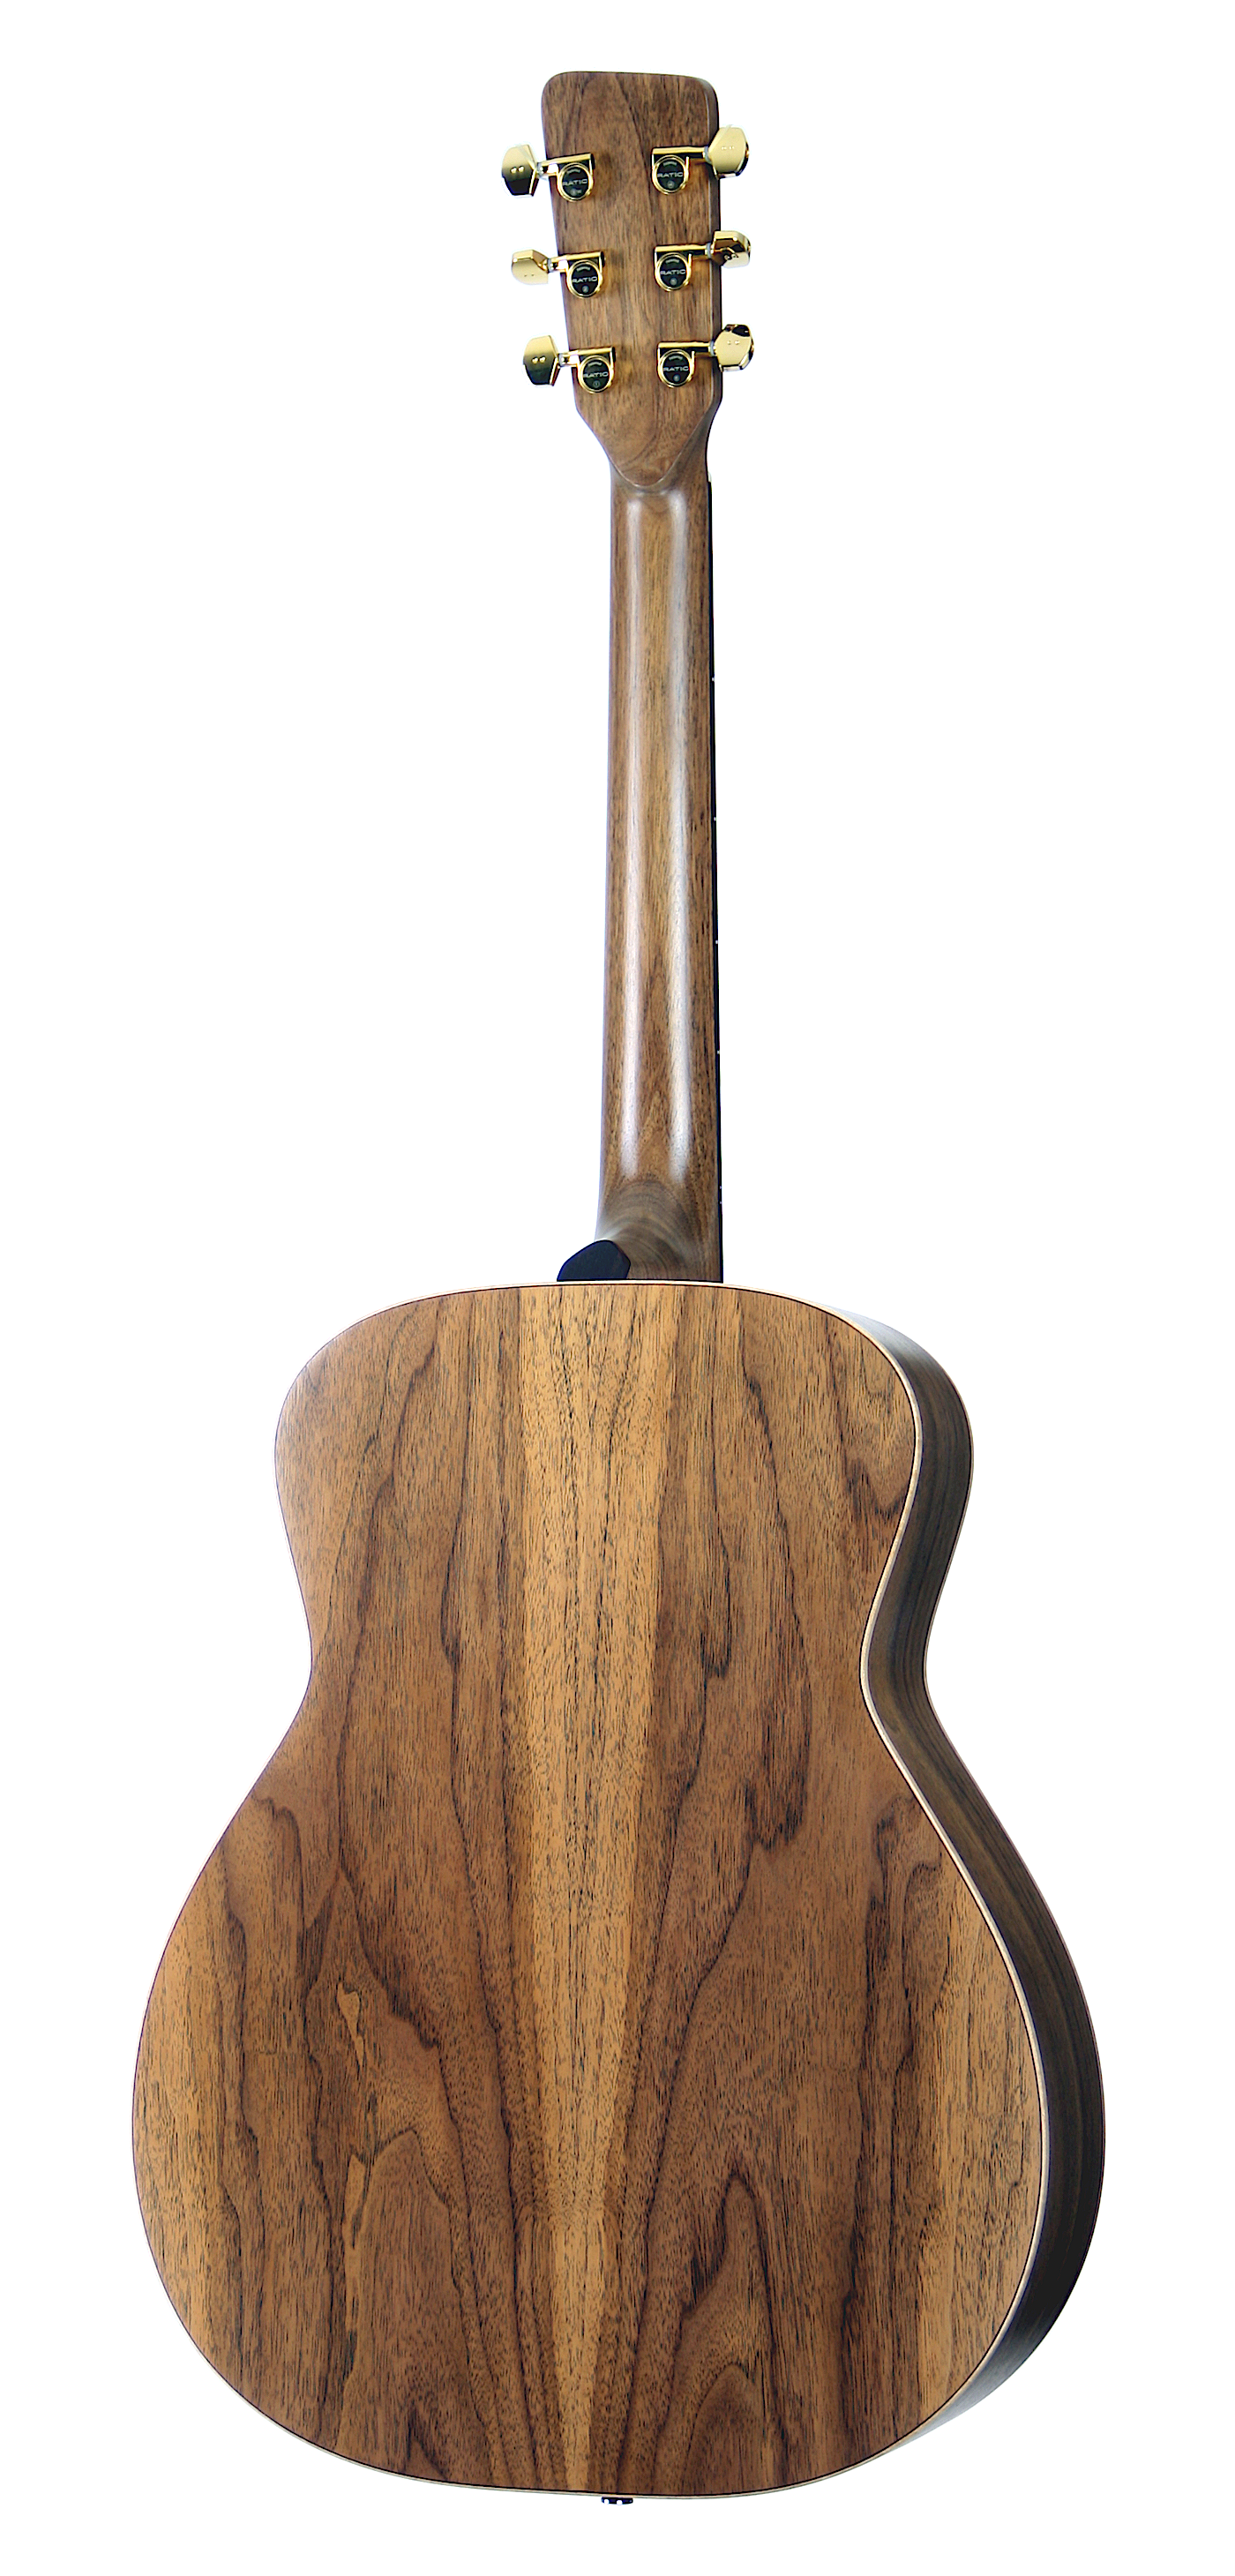 OONA™ Grand Performance, solid wood acoustic guitar. Red cedar soundboard, black walnut neck and body